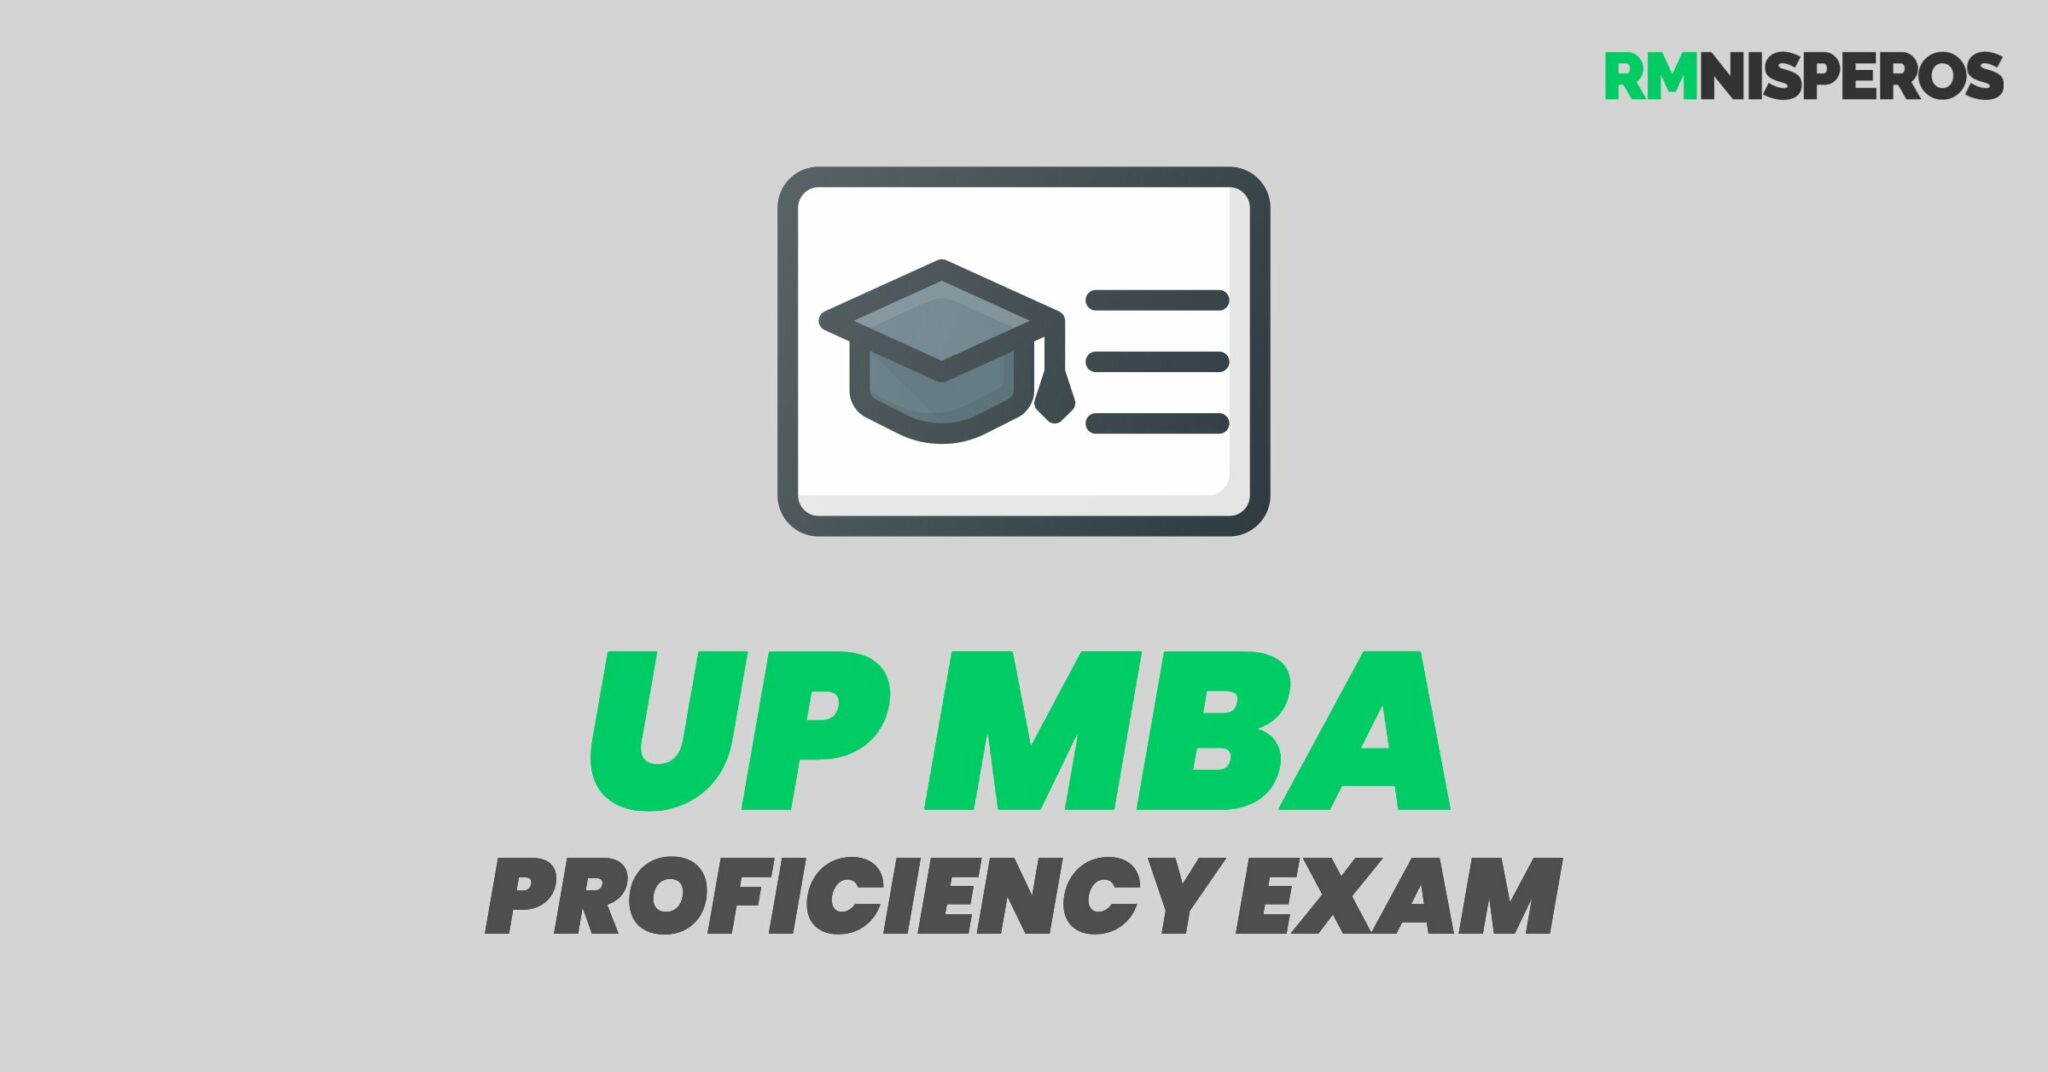 UP MBA Proficiency Exam Reviewer